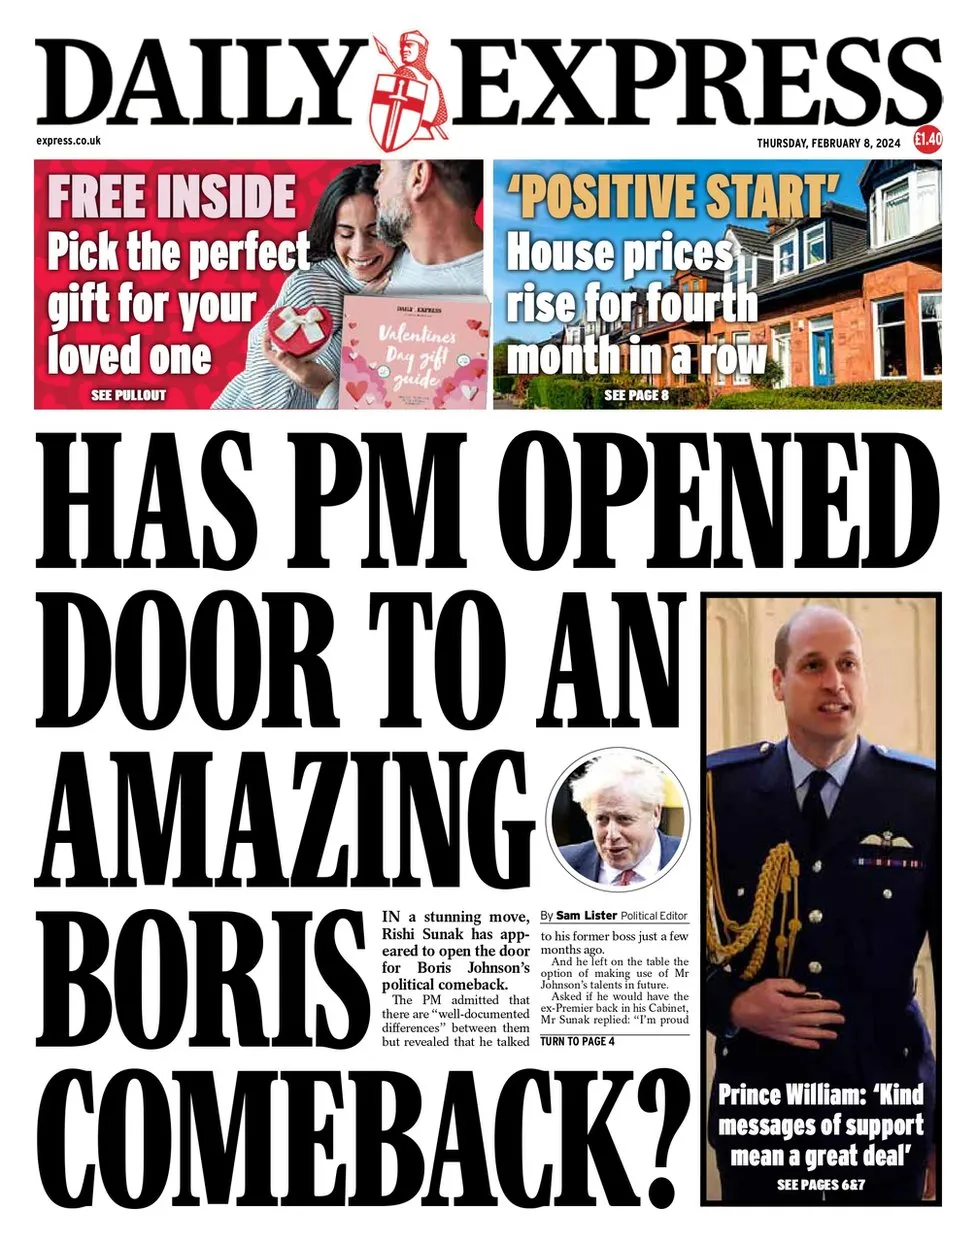 Daily Express - Has PM opened door to Boris Johnson come back? 